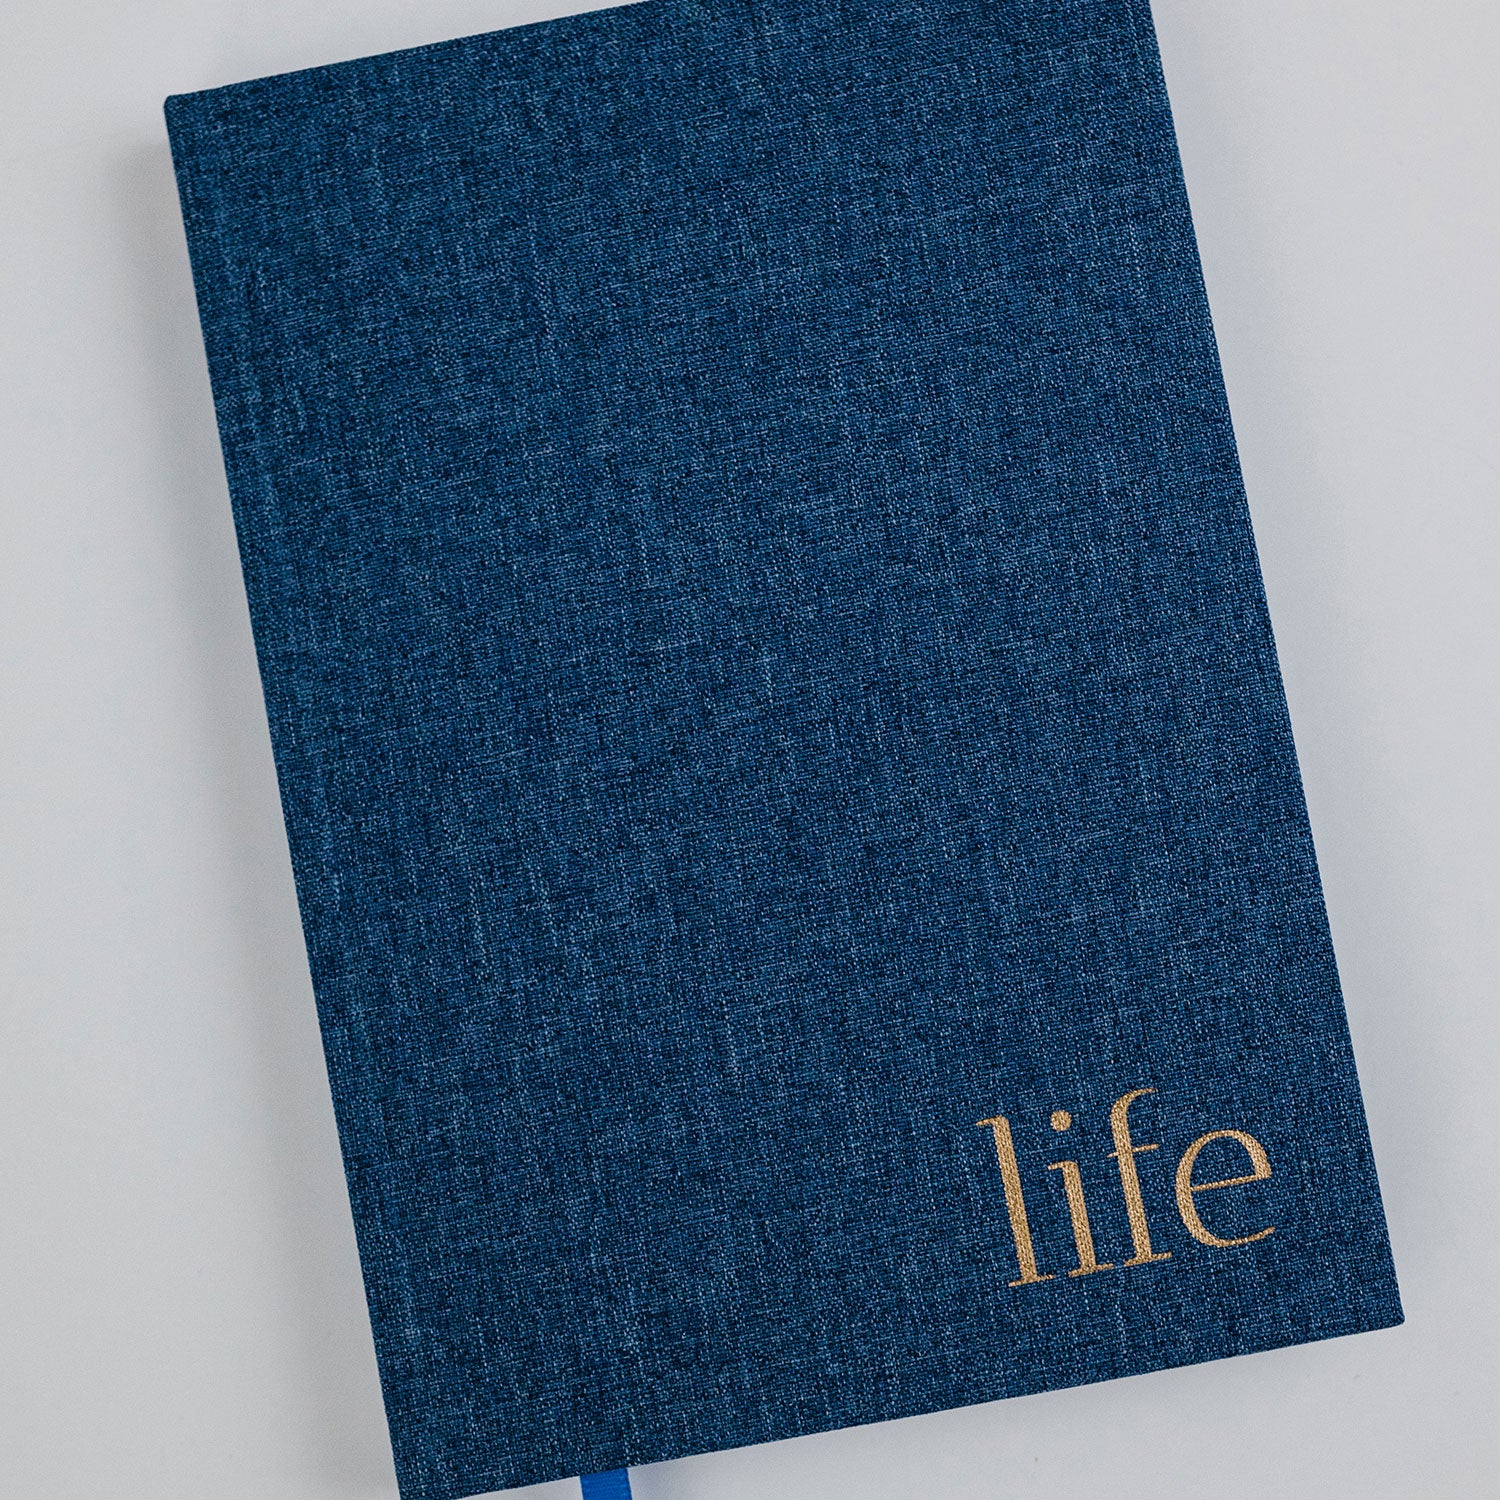 Remarkable Life Journal- PROMPTED CHILDS LIFE JOURNAL